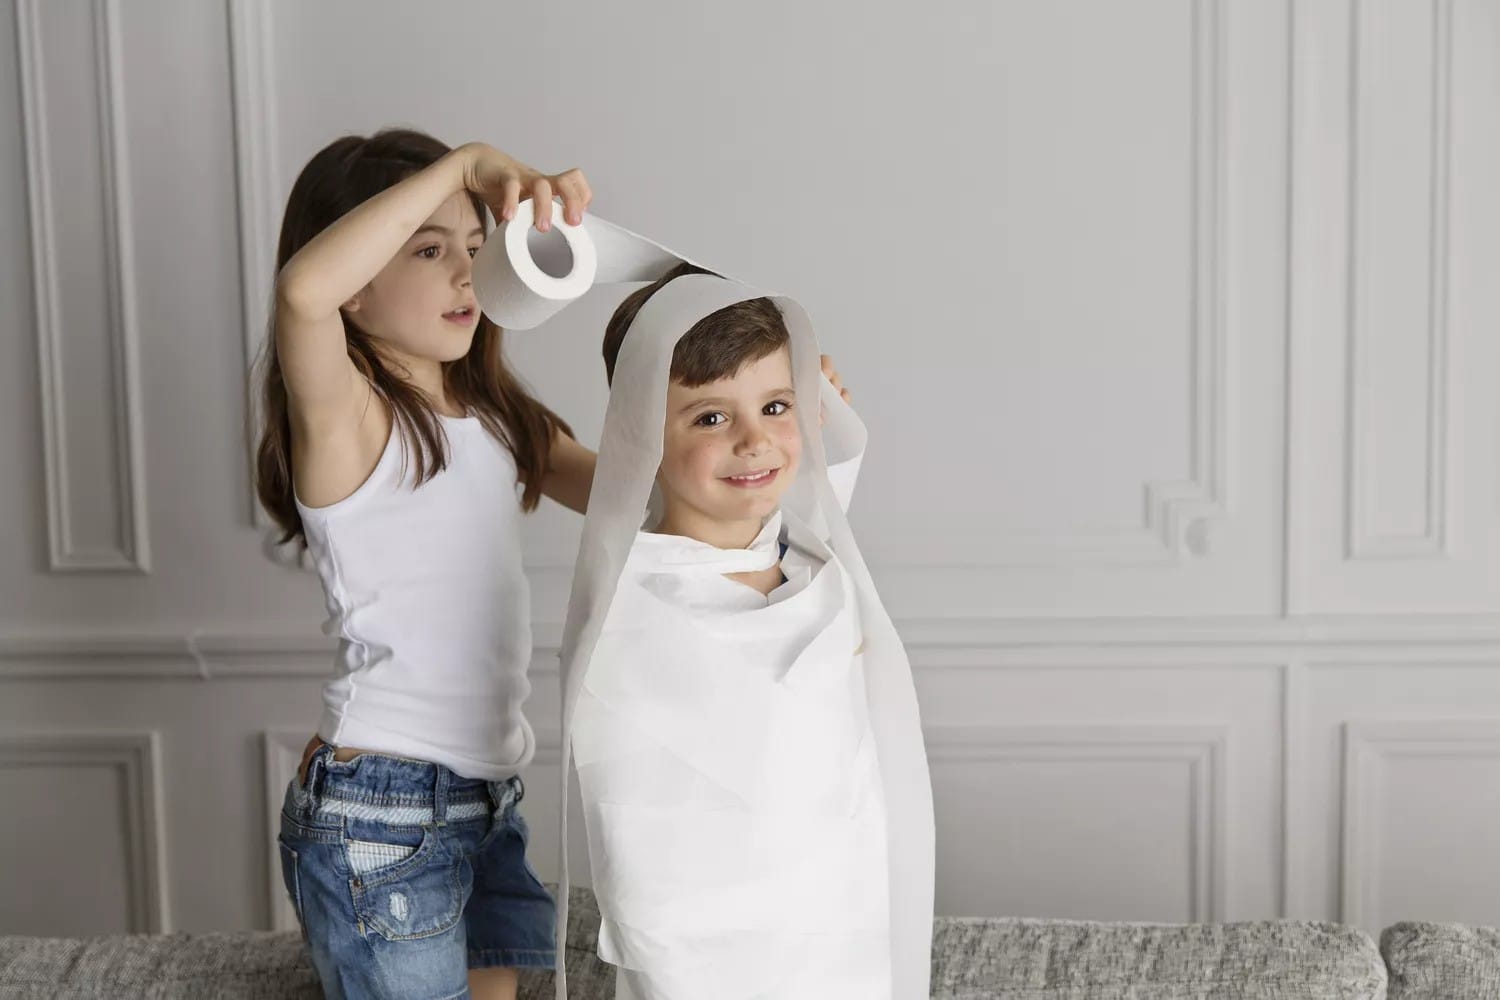 Mummy Wrap girl wrapping toilet paper around her little brother at home